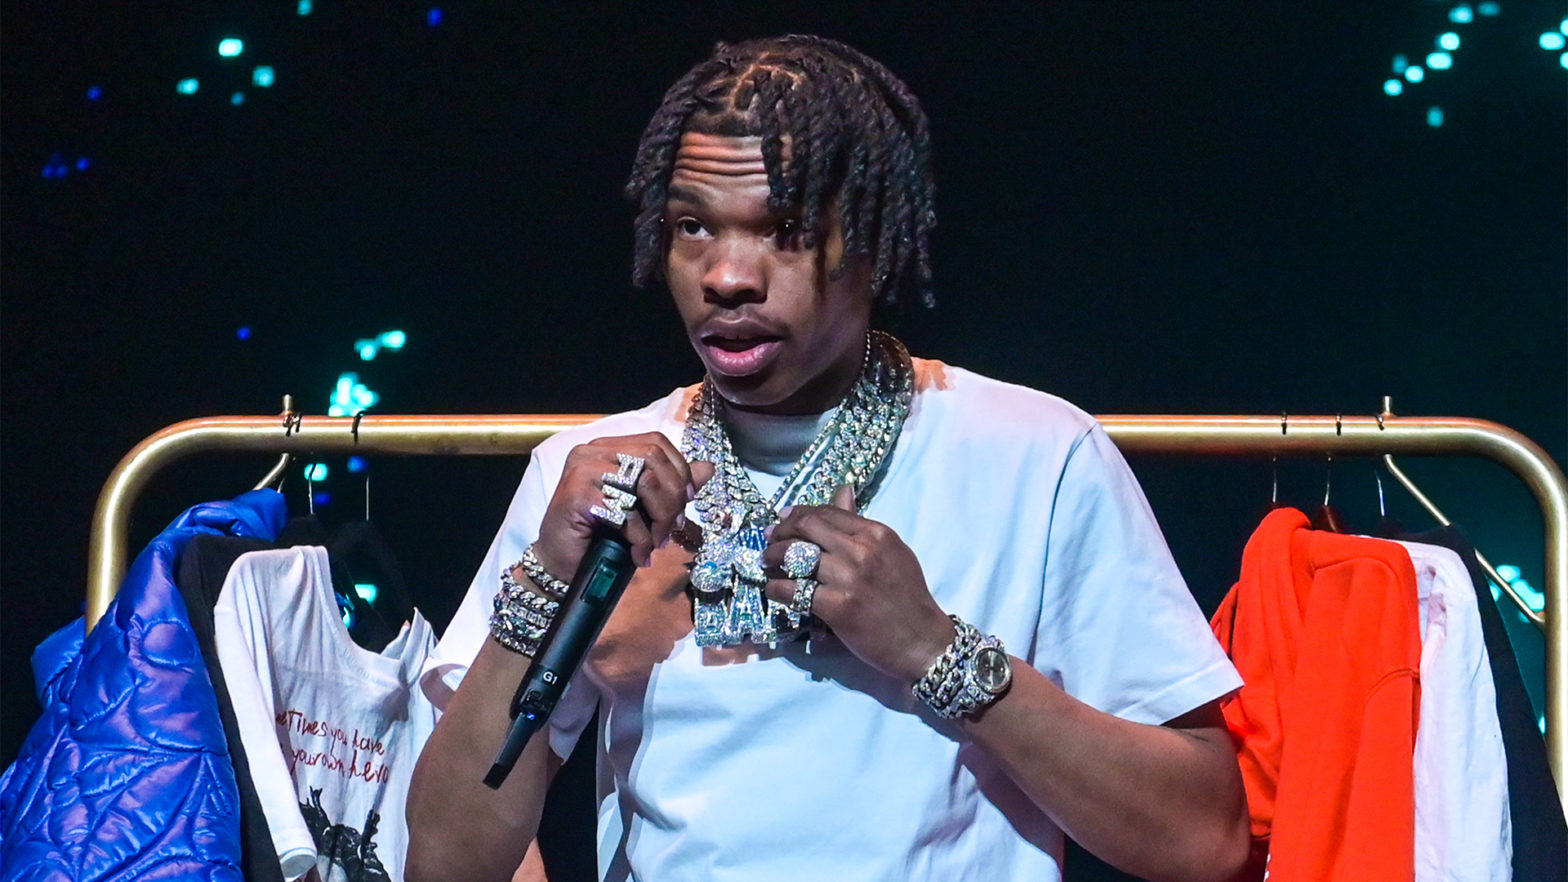 Lil Baby Shares The Lesson He Learned After His First Booked Show For $750 Ended Up Costing Him $2K